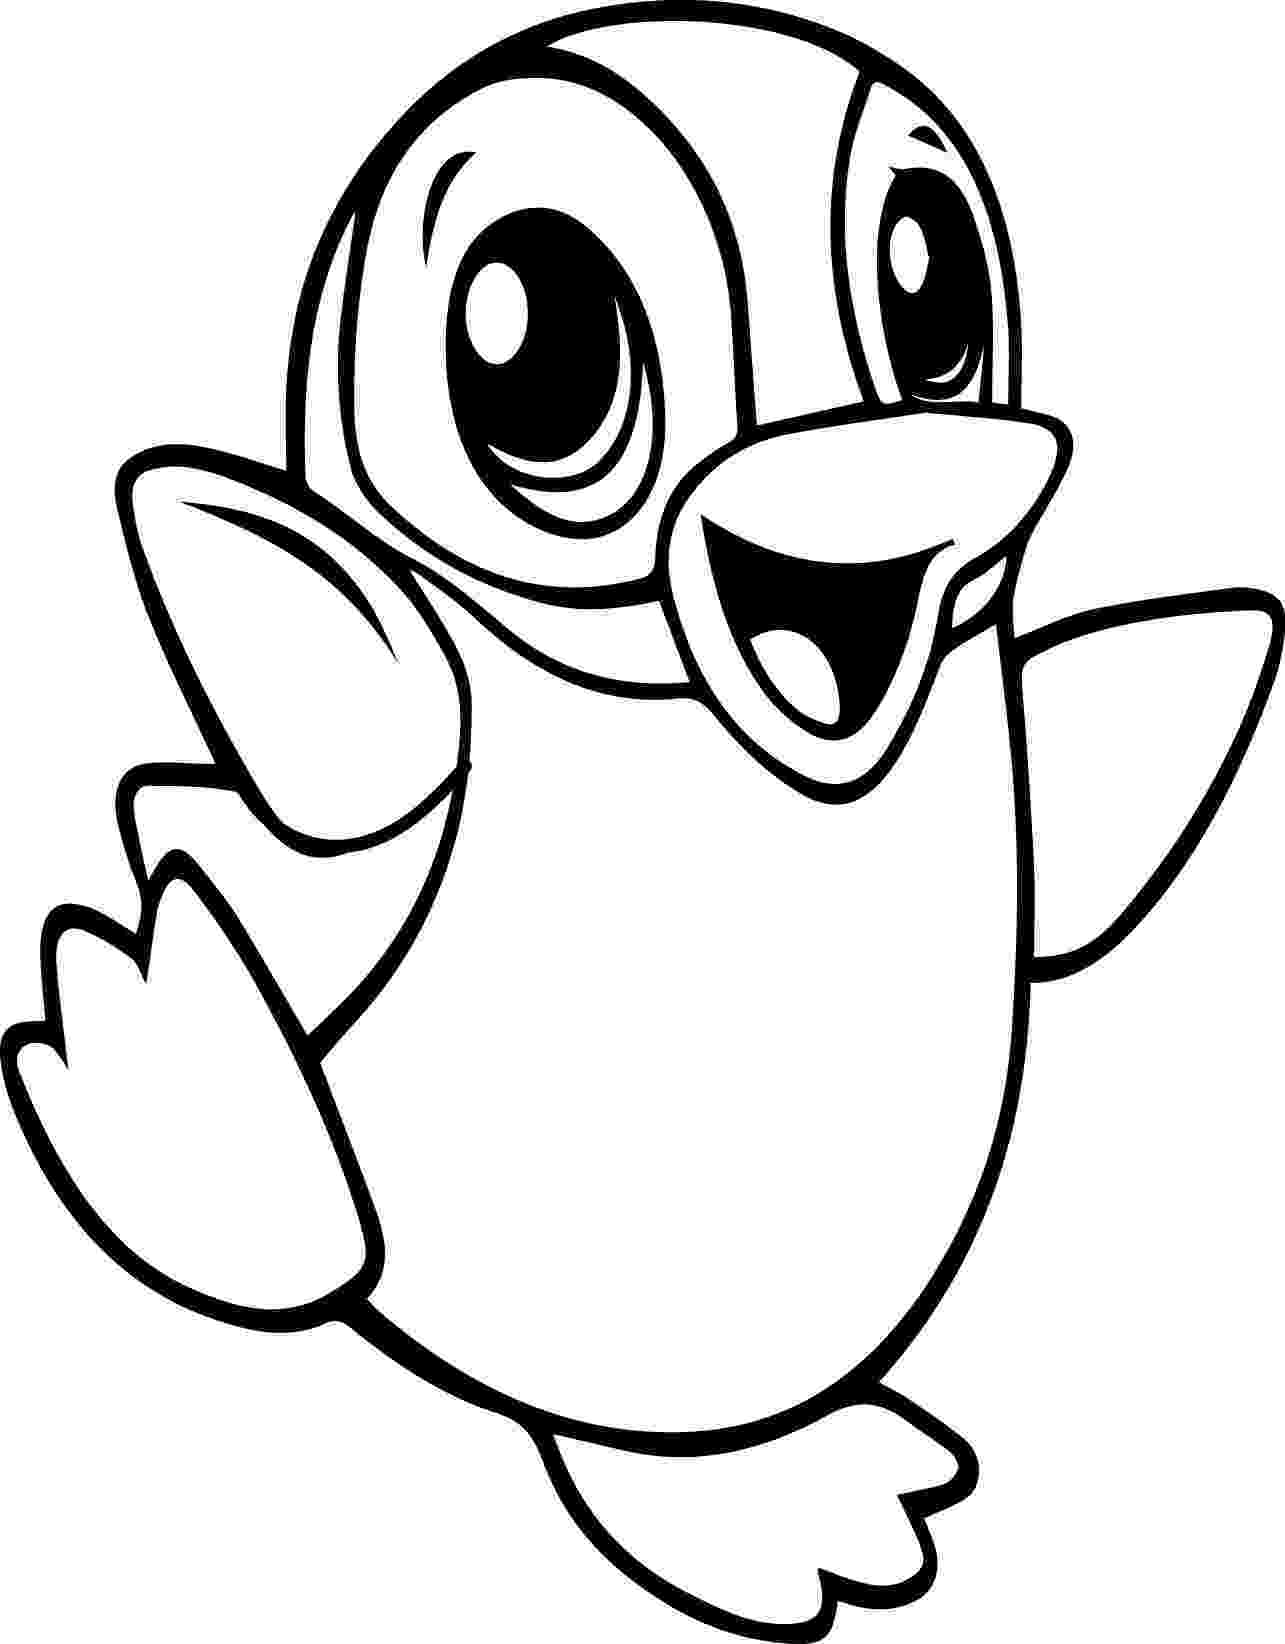 cute baby animal coloring pictures cute animal coloring pages best coloring pages for kids animal pictures cute baby coloring 